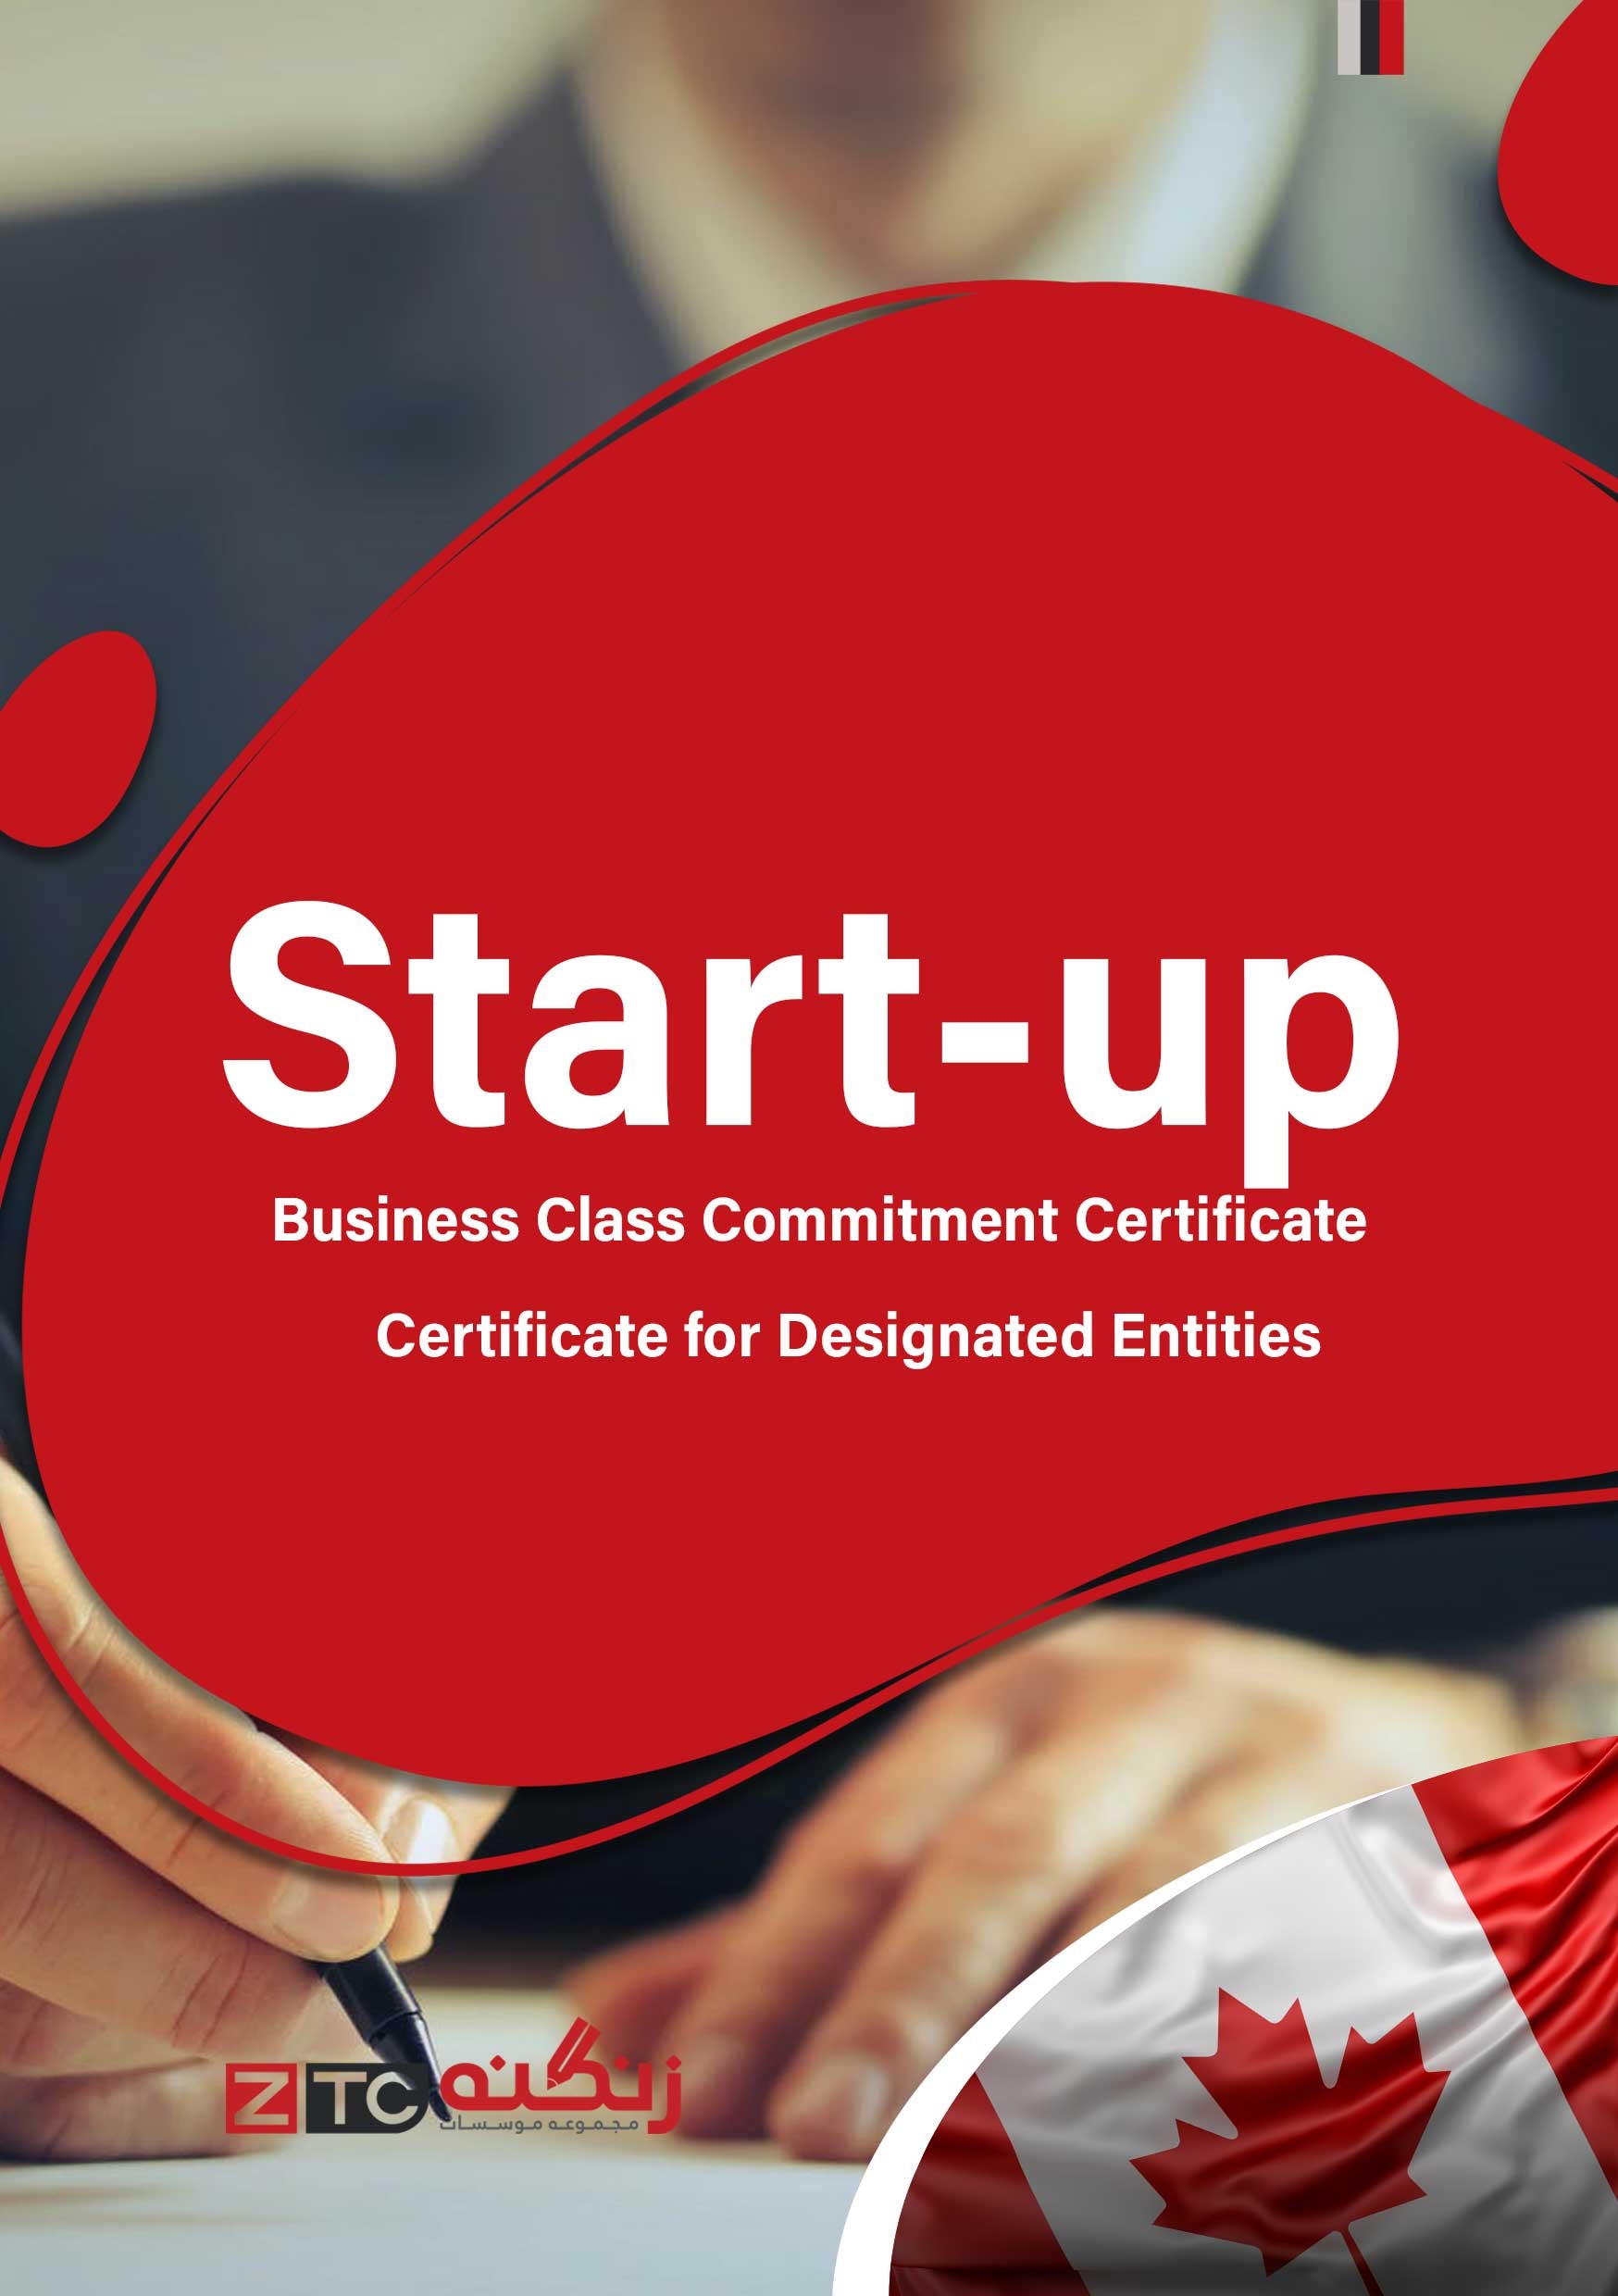 Start-up Business Class Commitment Certificate for Designated Entities